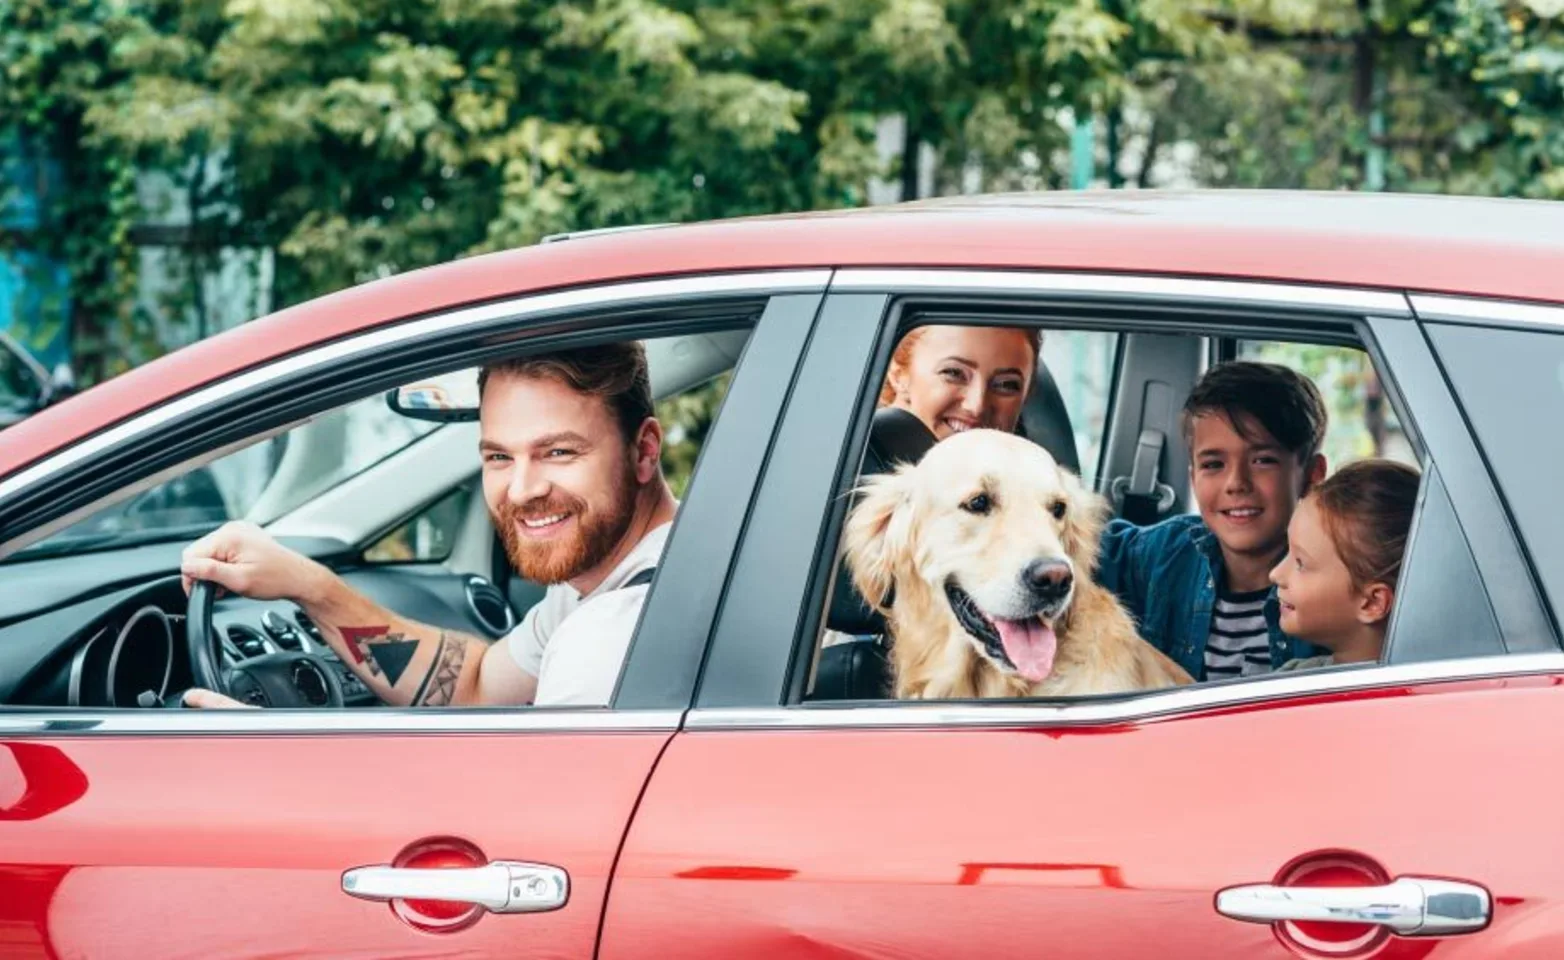 Family in car with a dog